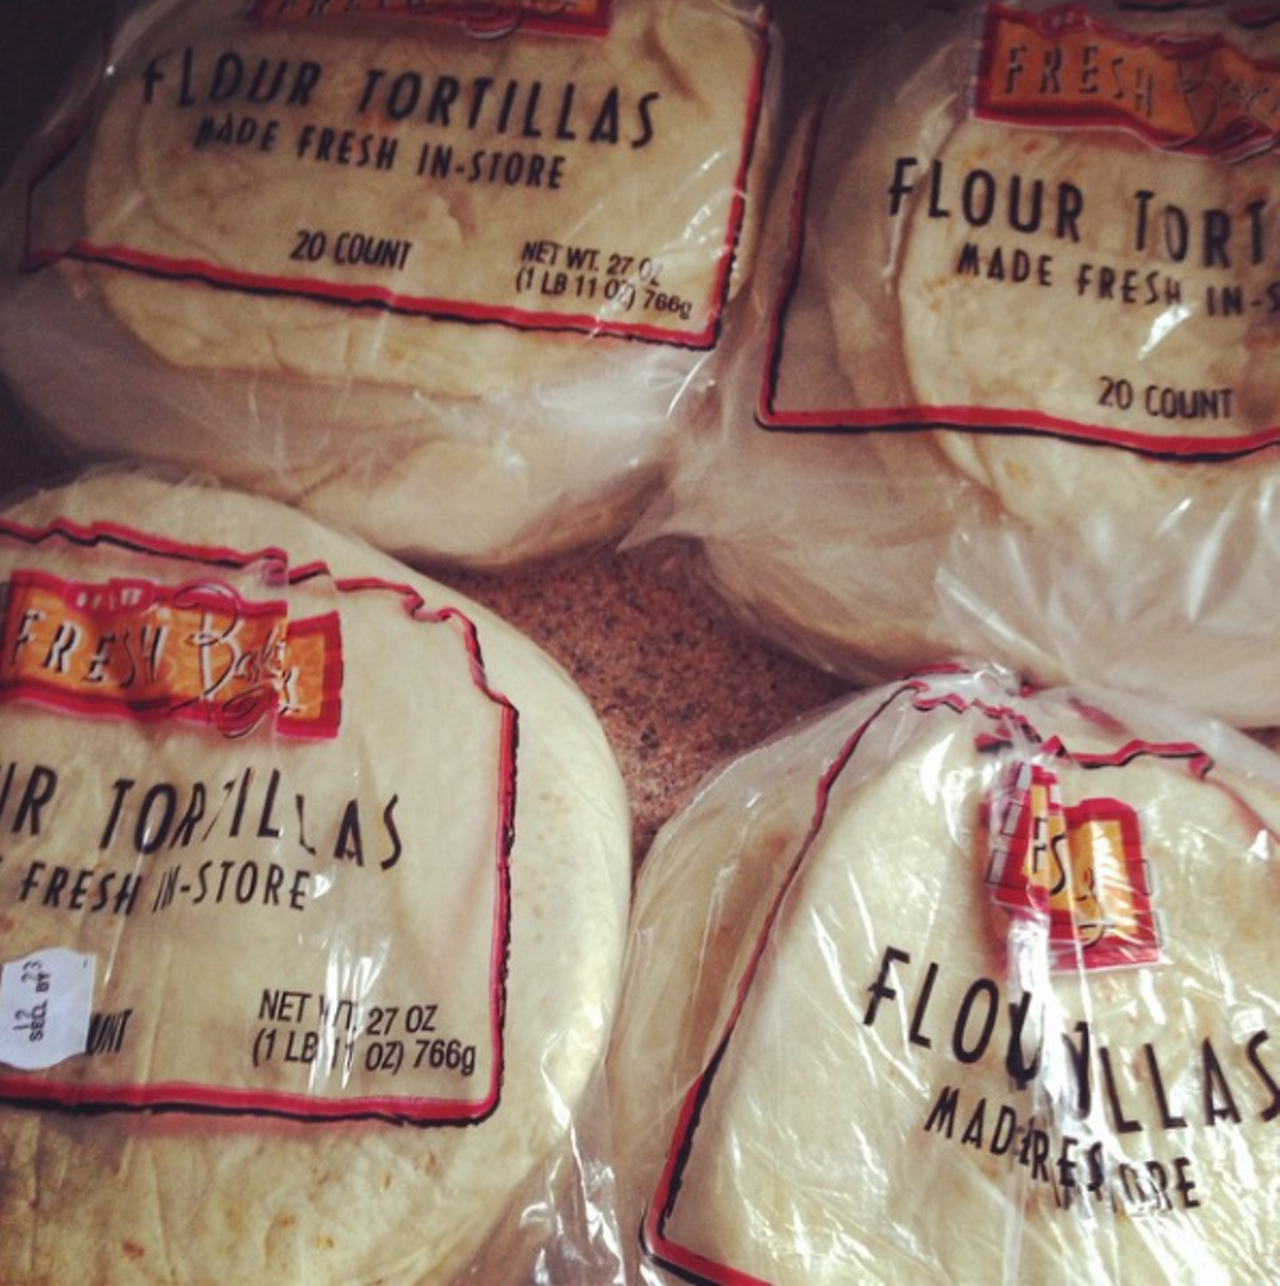 Fresh Tortillas
There's no resisting HEB's tortillas, no matter how hard you try. They're fluffy. They're thick. They're absolutely perfect. 
Photo via Instagram, stace_knight
